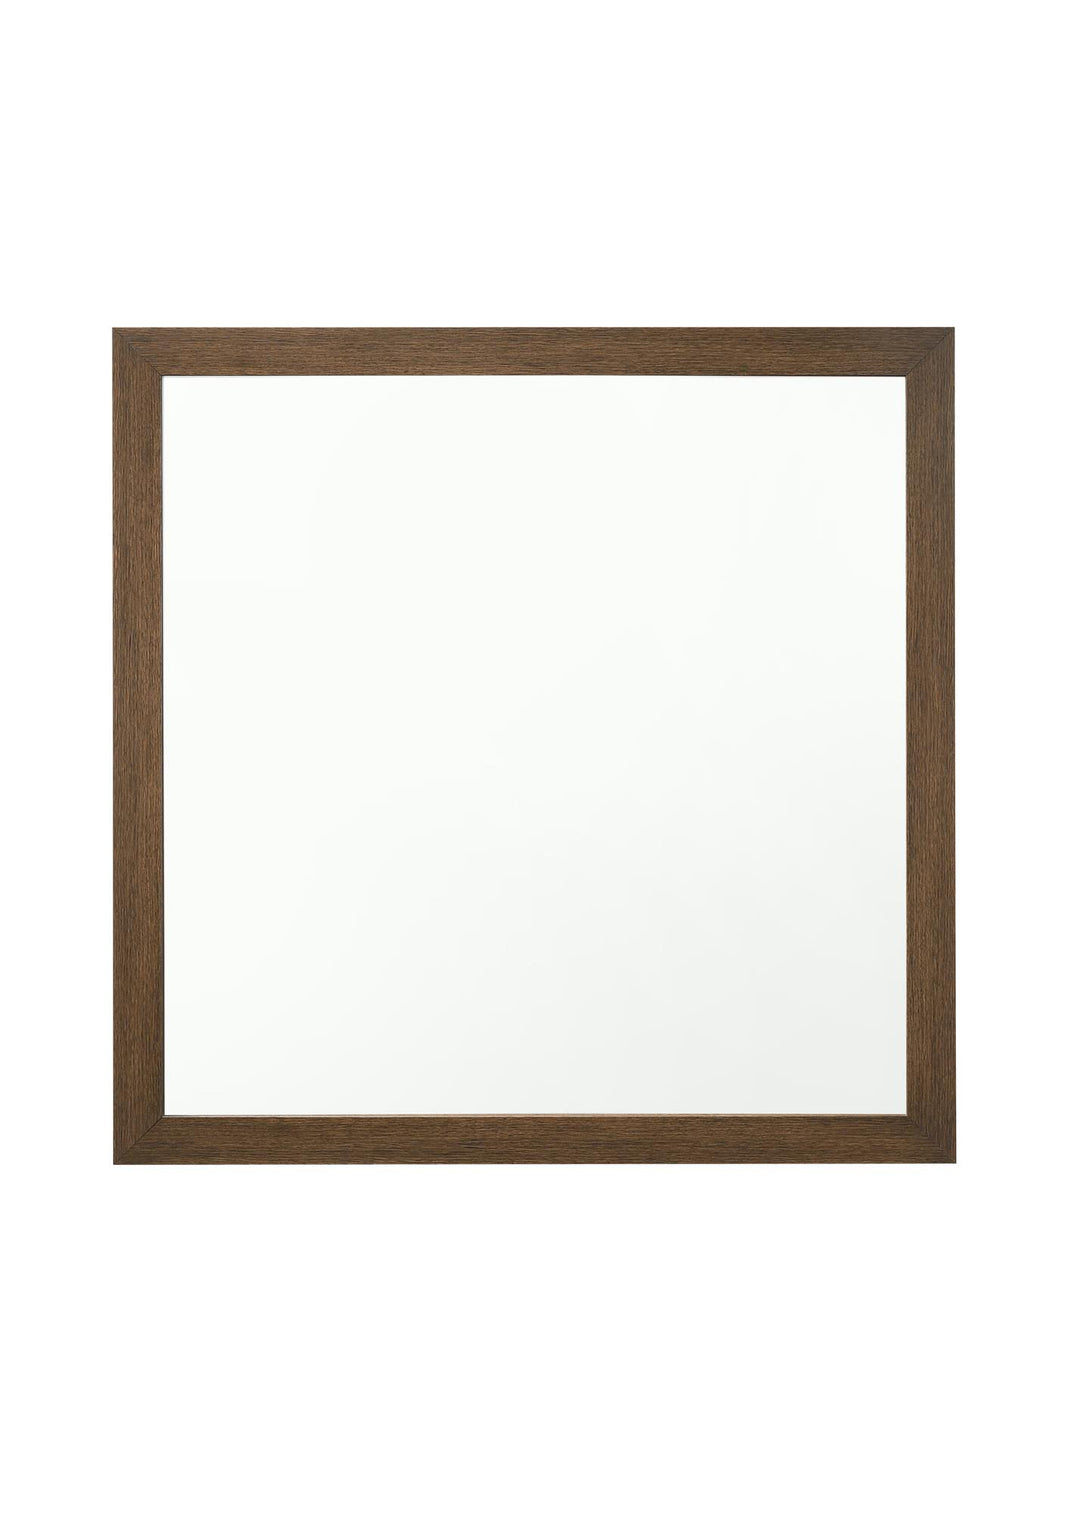 Miquell Wood Framed Square Mirror  -  Oak